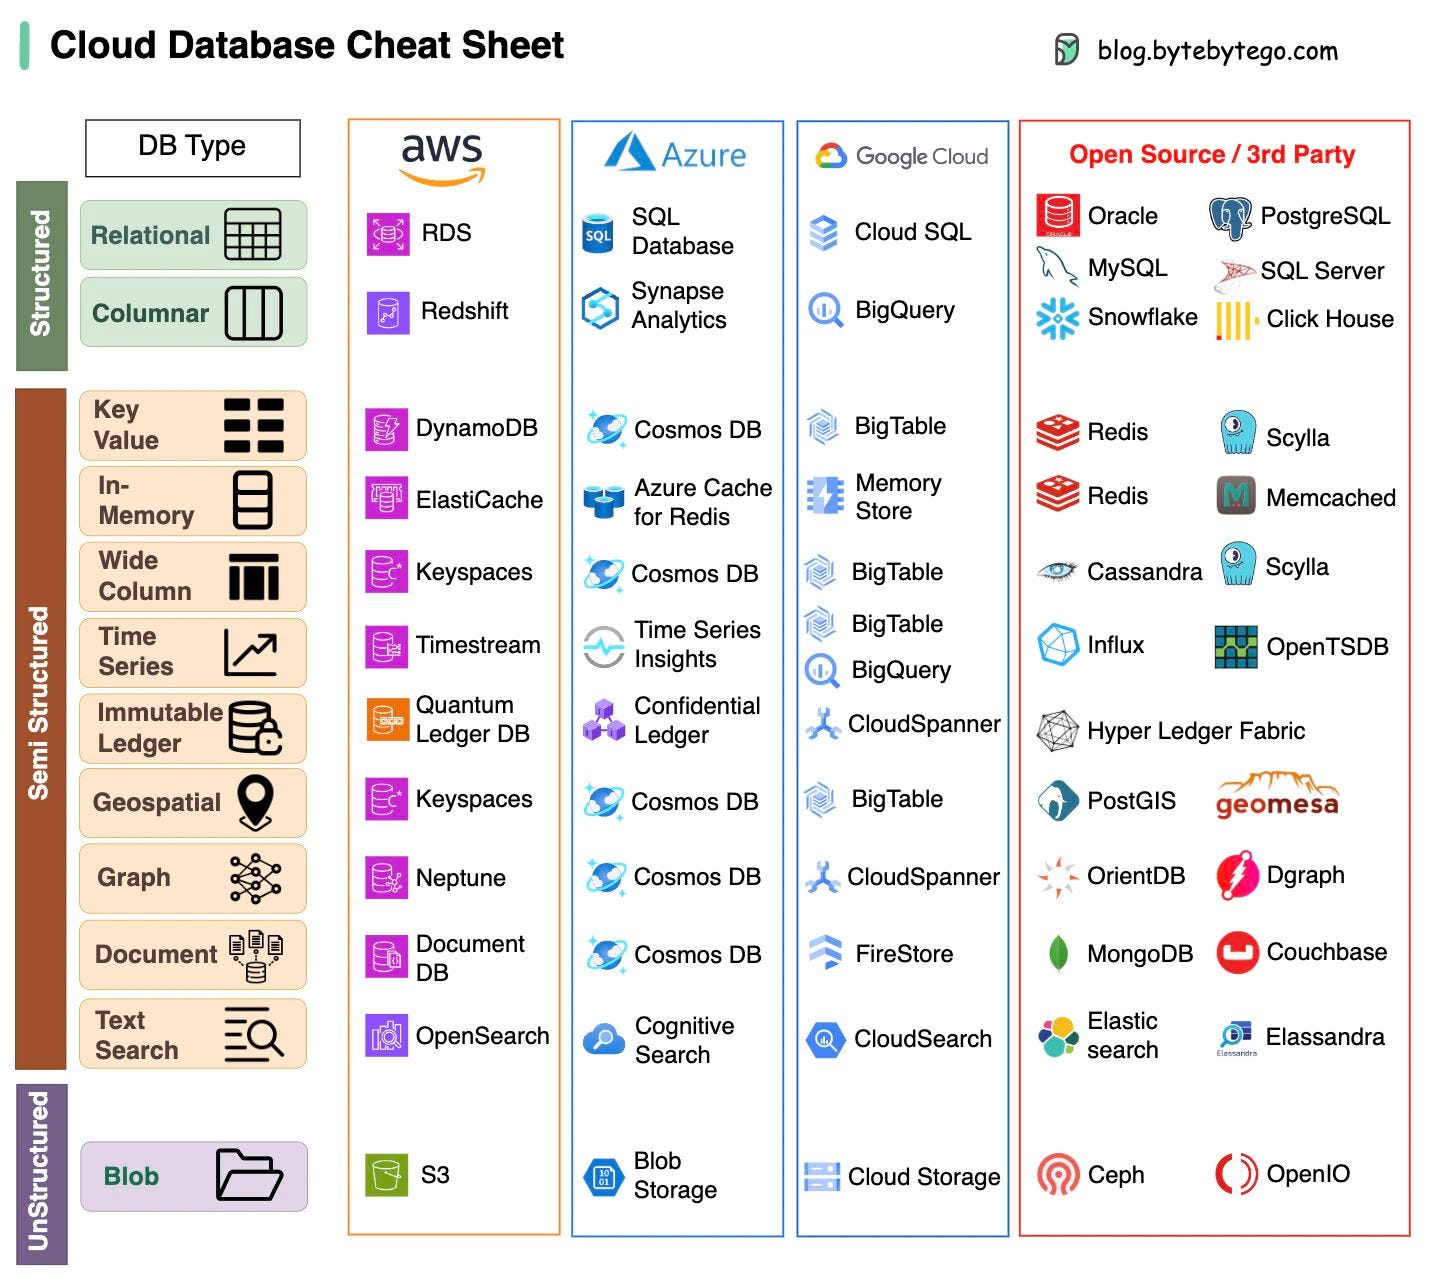 EP73: Cheat sheet of different databases in cloud services